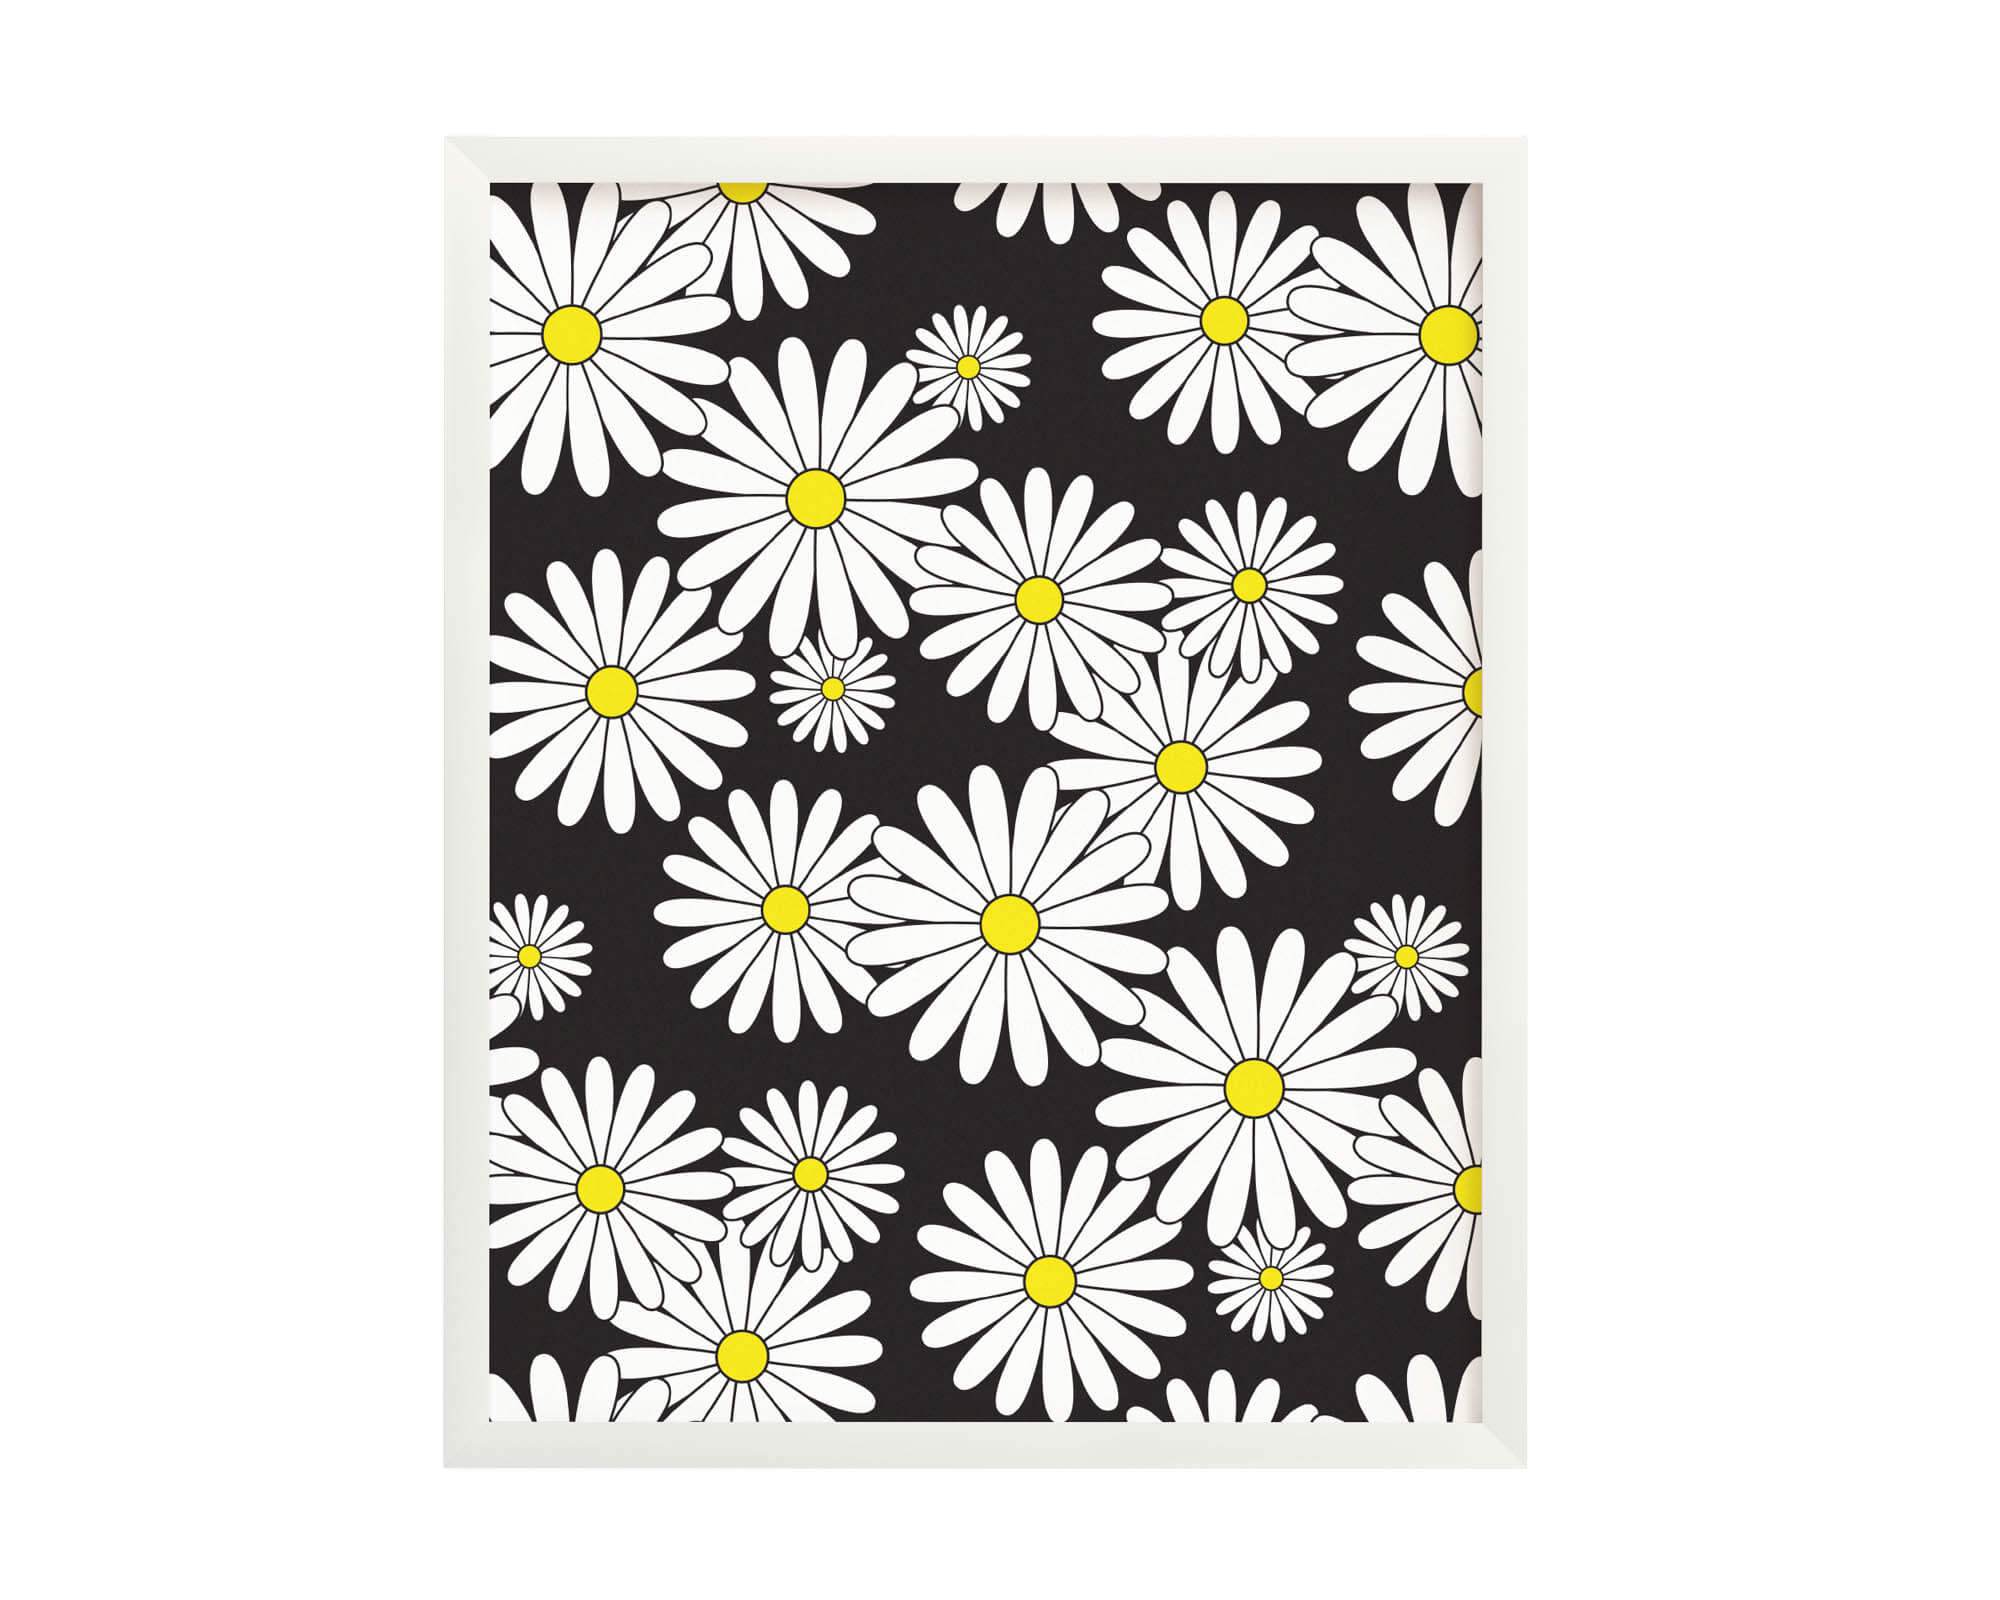 "Ditsy Daisy Love" scattered daisy pattern archival giclée art print in black and white. Made in USA by My Darlin' @mydarlin_bk